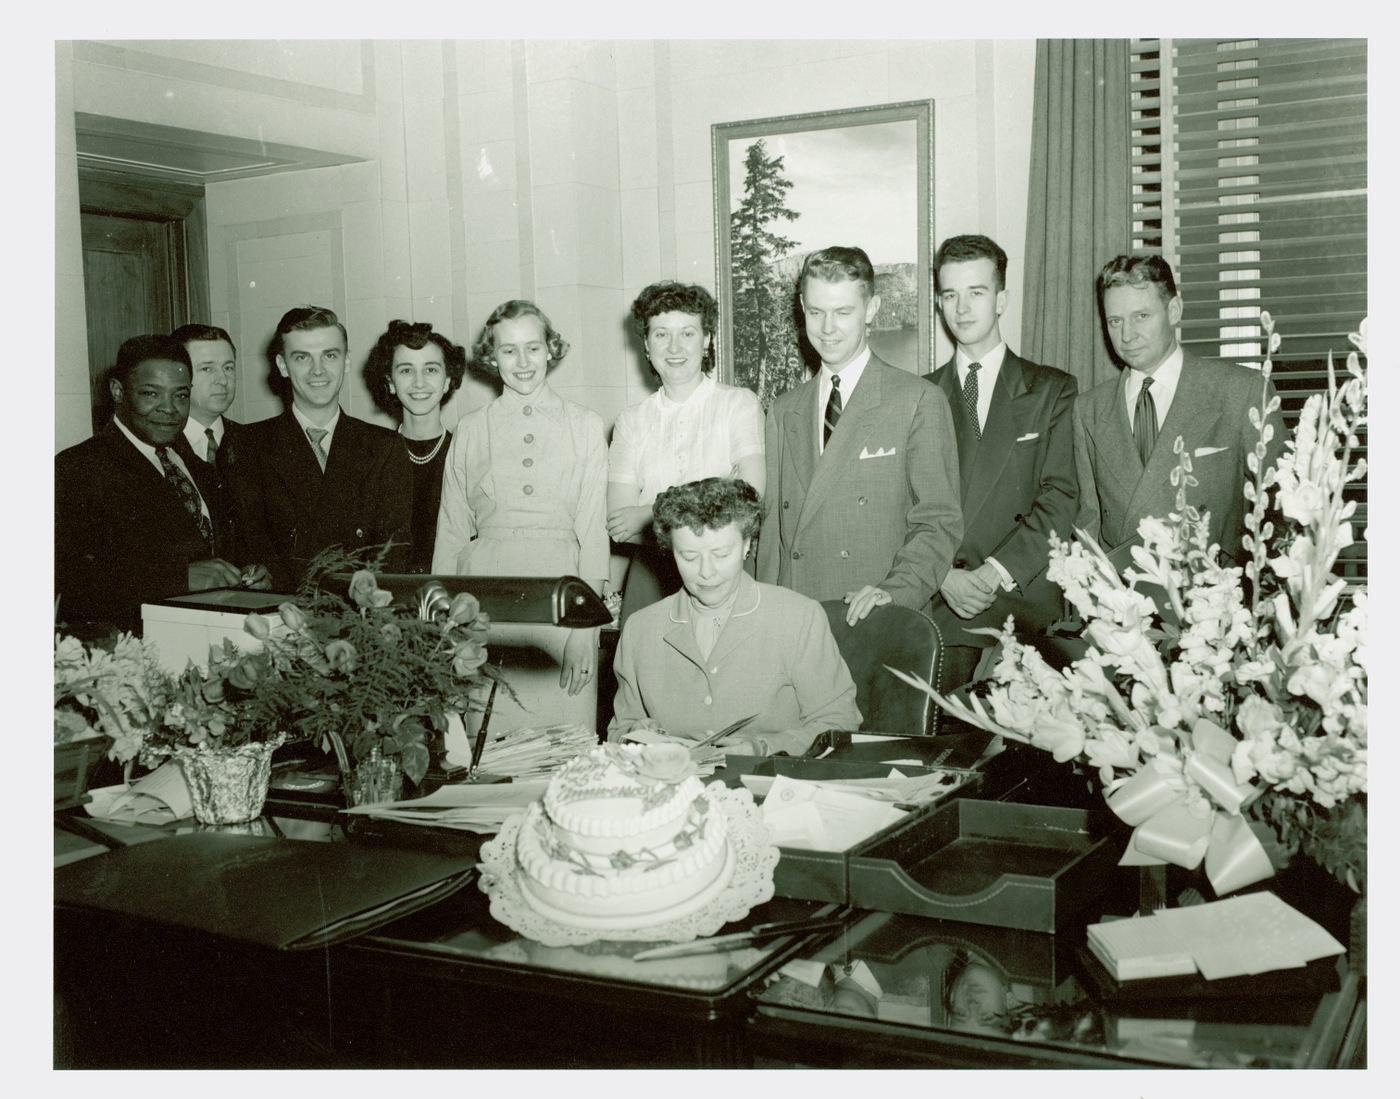 1950s-era photo photo depicting J. Edgar Hoover's assistant, Helen Gandy, celebrating with colleagues.